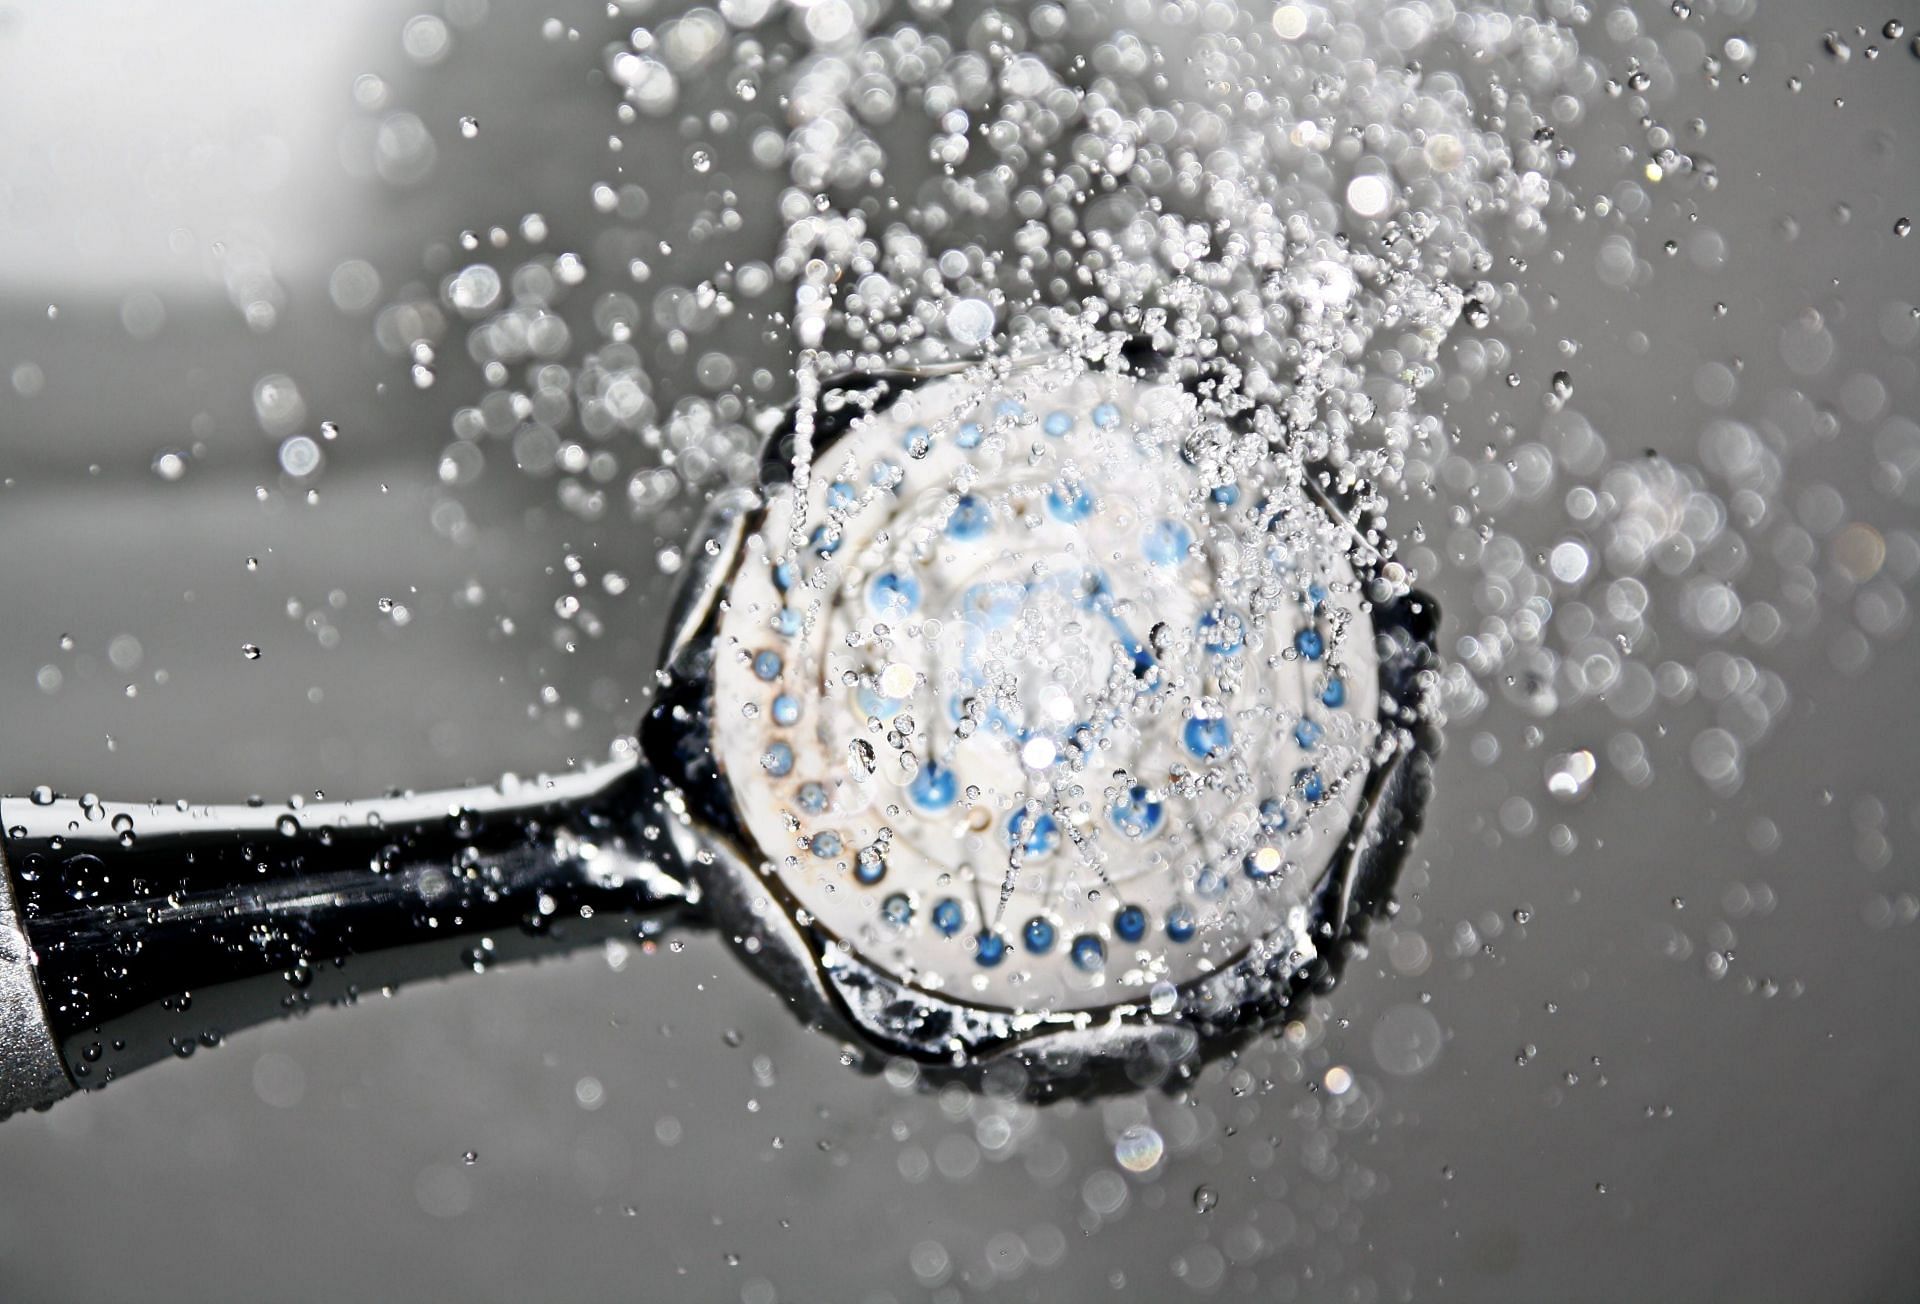 Importance of a shower routine (image sourced via Pexels / Photo by pixabay)